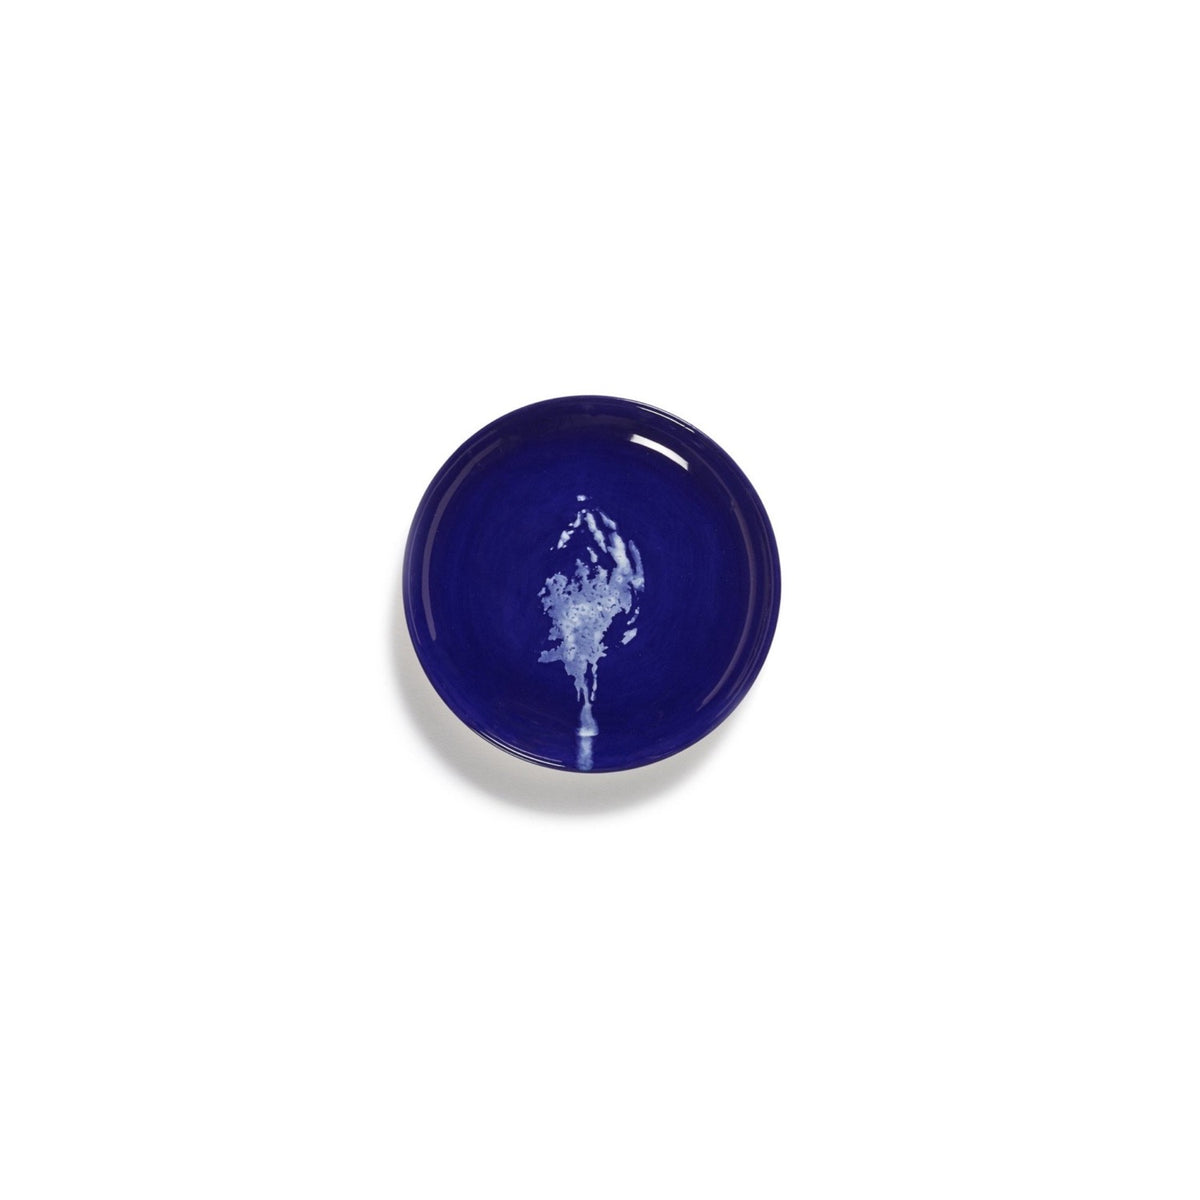 Ottolenghi for Serax Feast collection; extra small plate, with lapis lazuli artichoke white design.